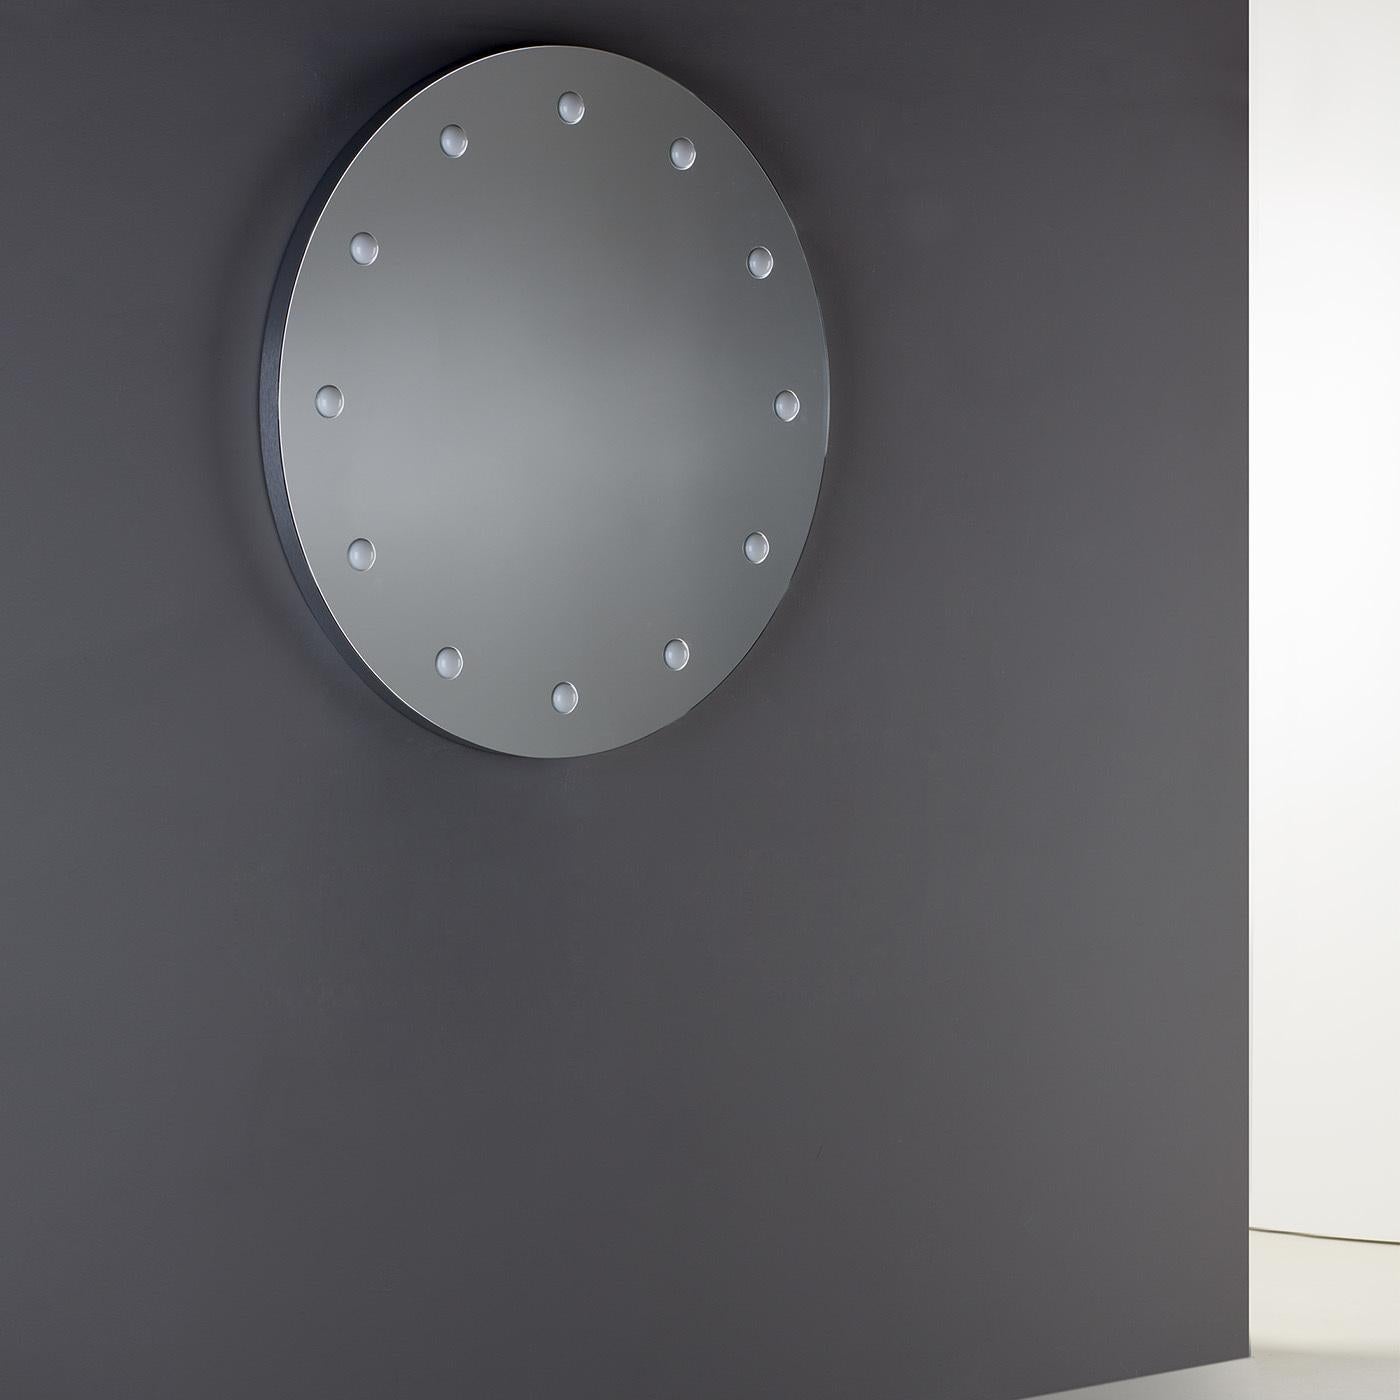 The perfect accessory for a diva at heart, this mirror is a must-have for a walk-in closet, bathroom or bedroom, lending old Hollywood glamour to any style interior. Part of the MDE Line, this high-tech design features a 4-cm thick curved profile